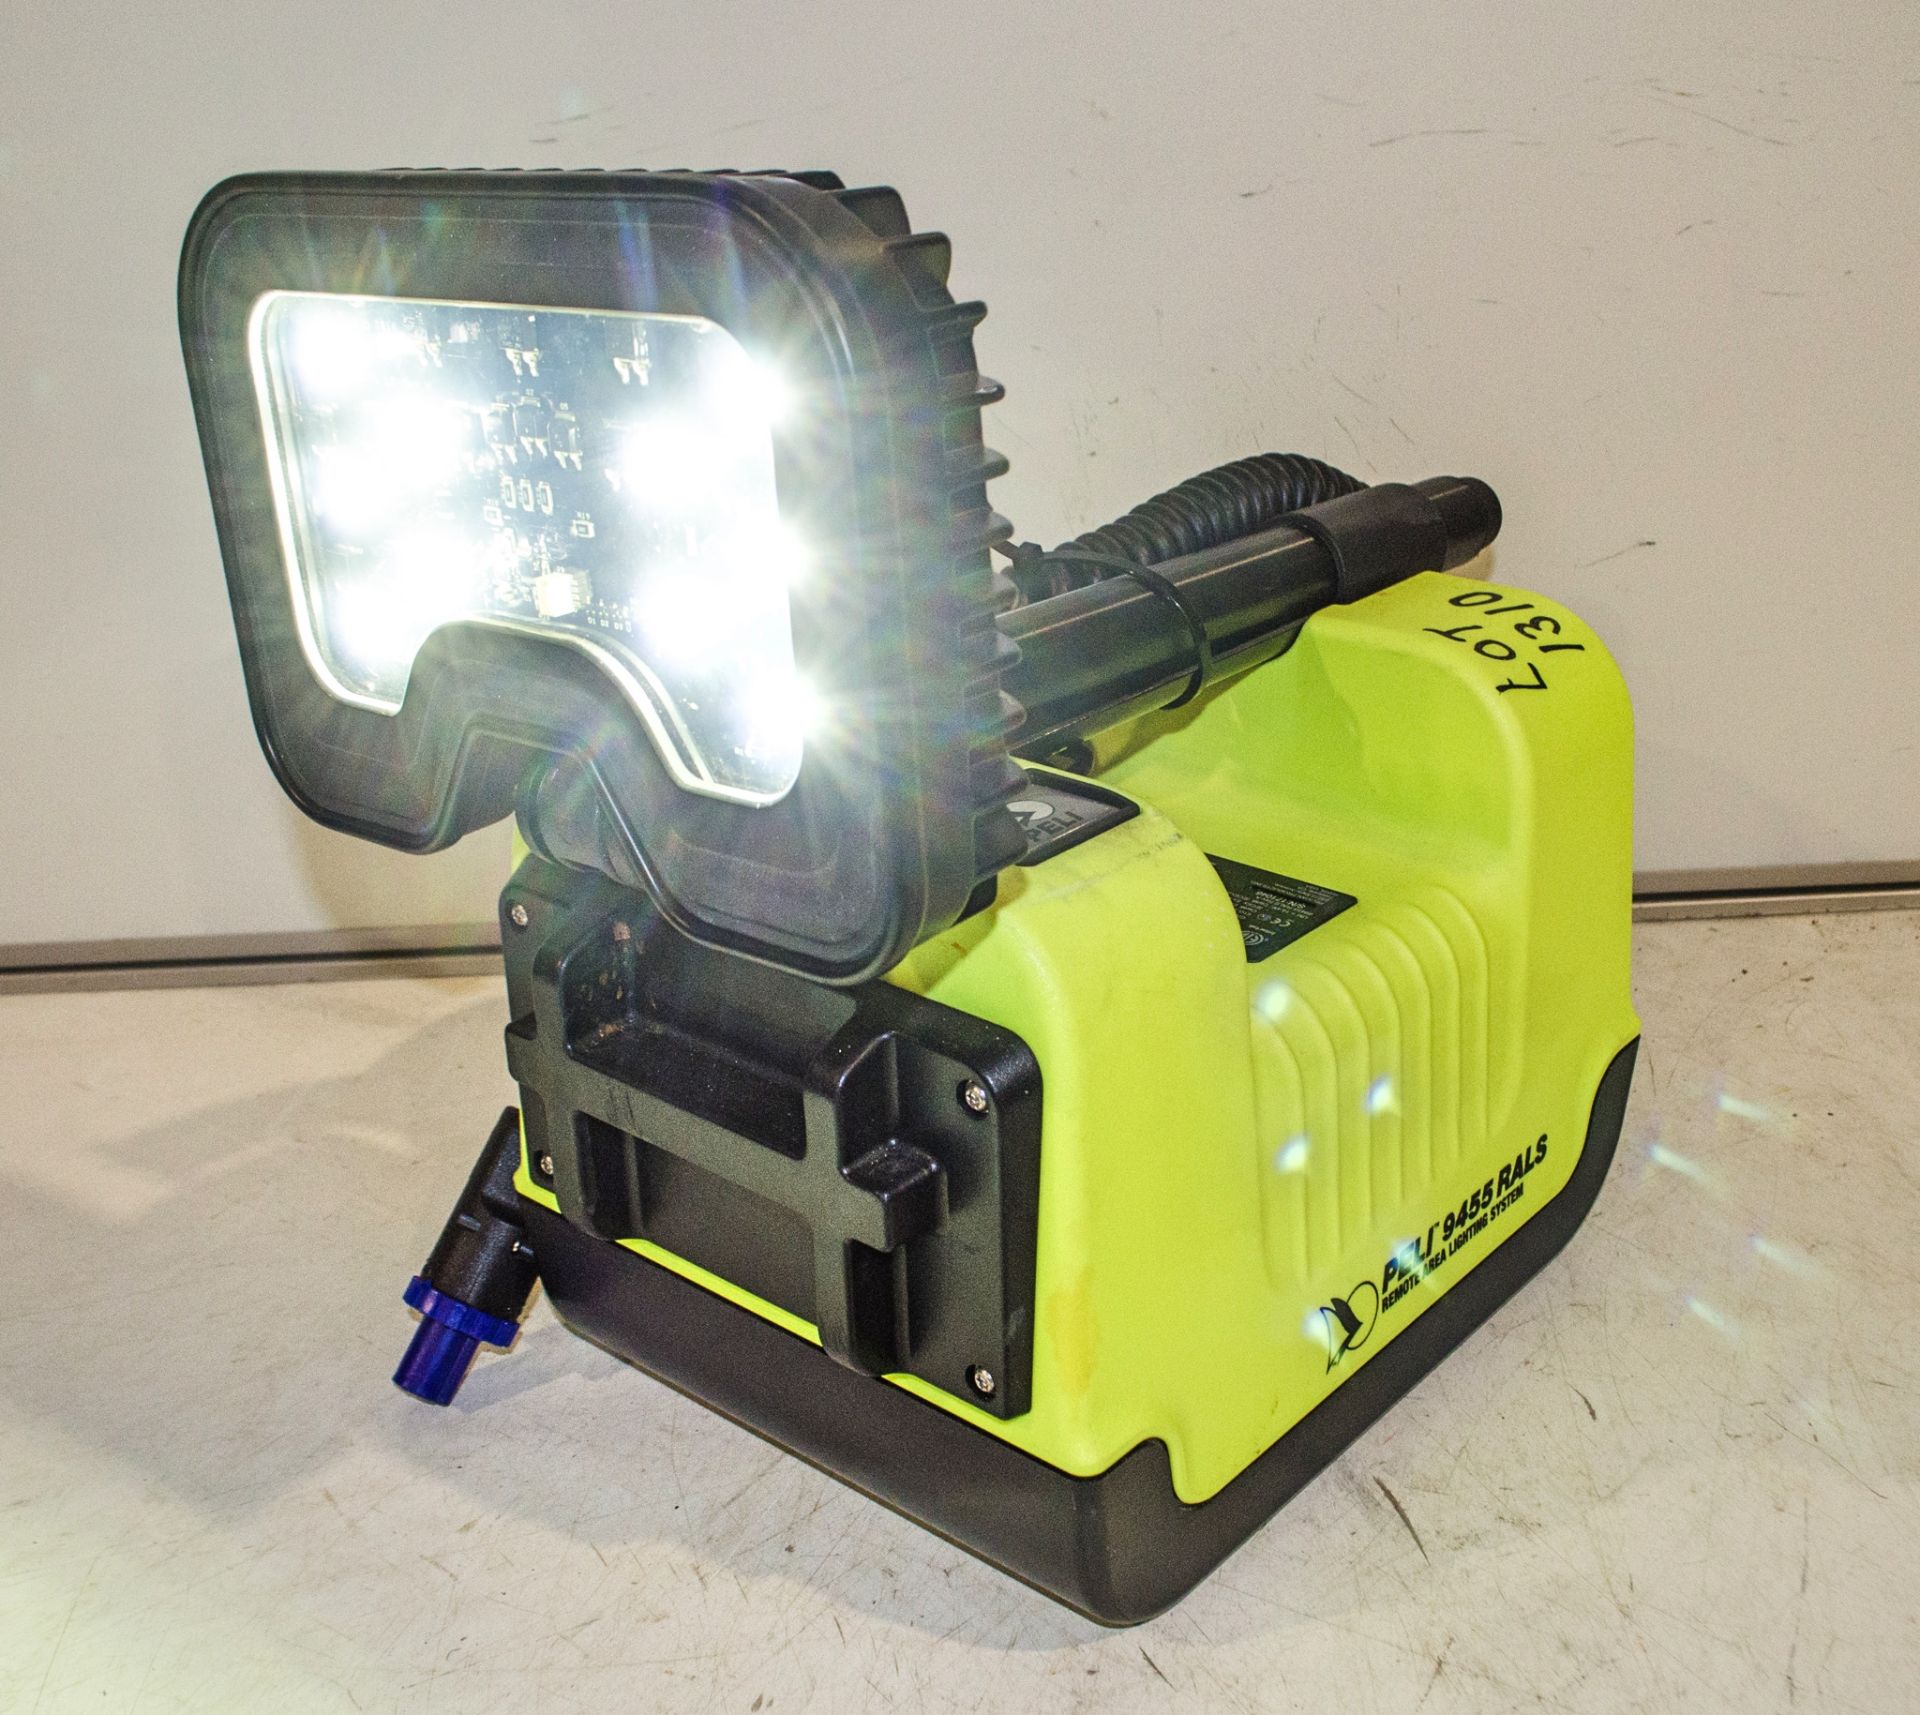 Peli 9455 RALS rechargeable LED worklight c/w charger ATEX001